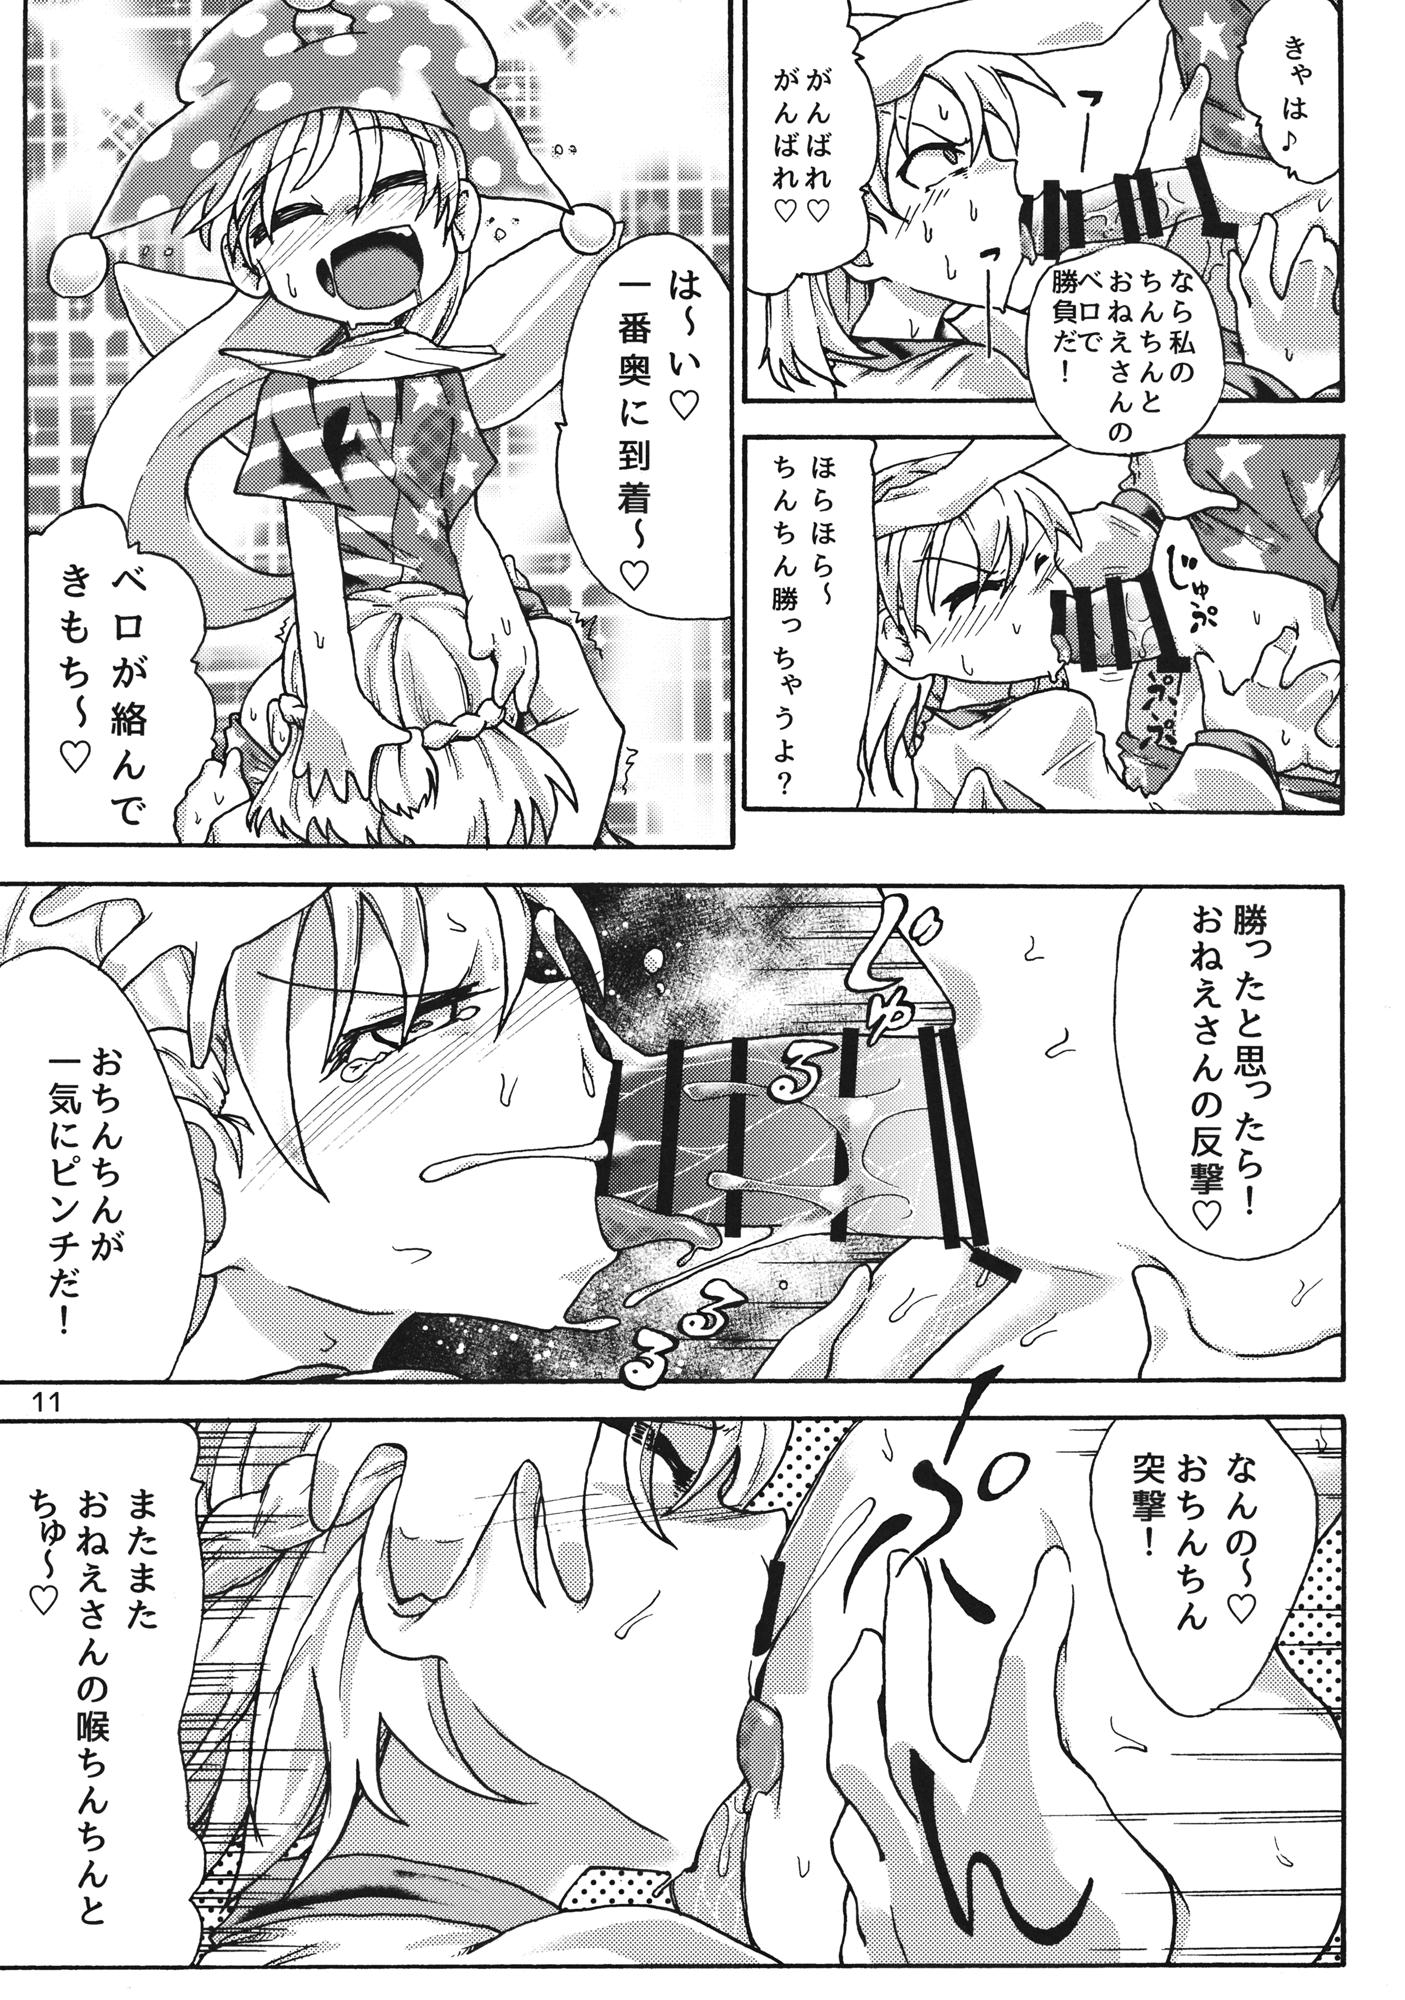 Gayfuck Creeping! - Touhou project Step - Page 10